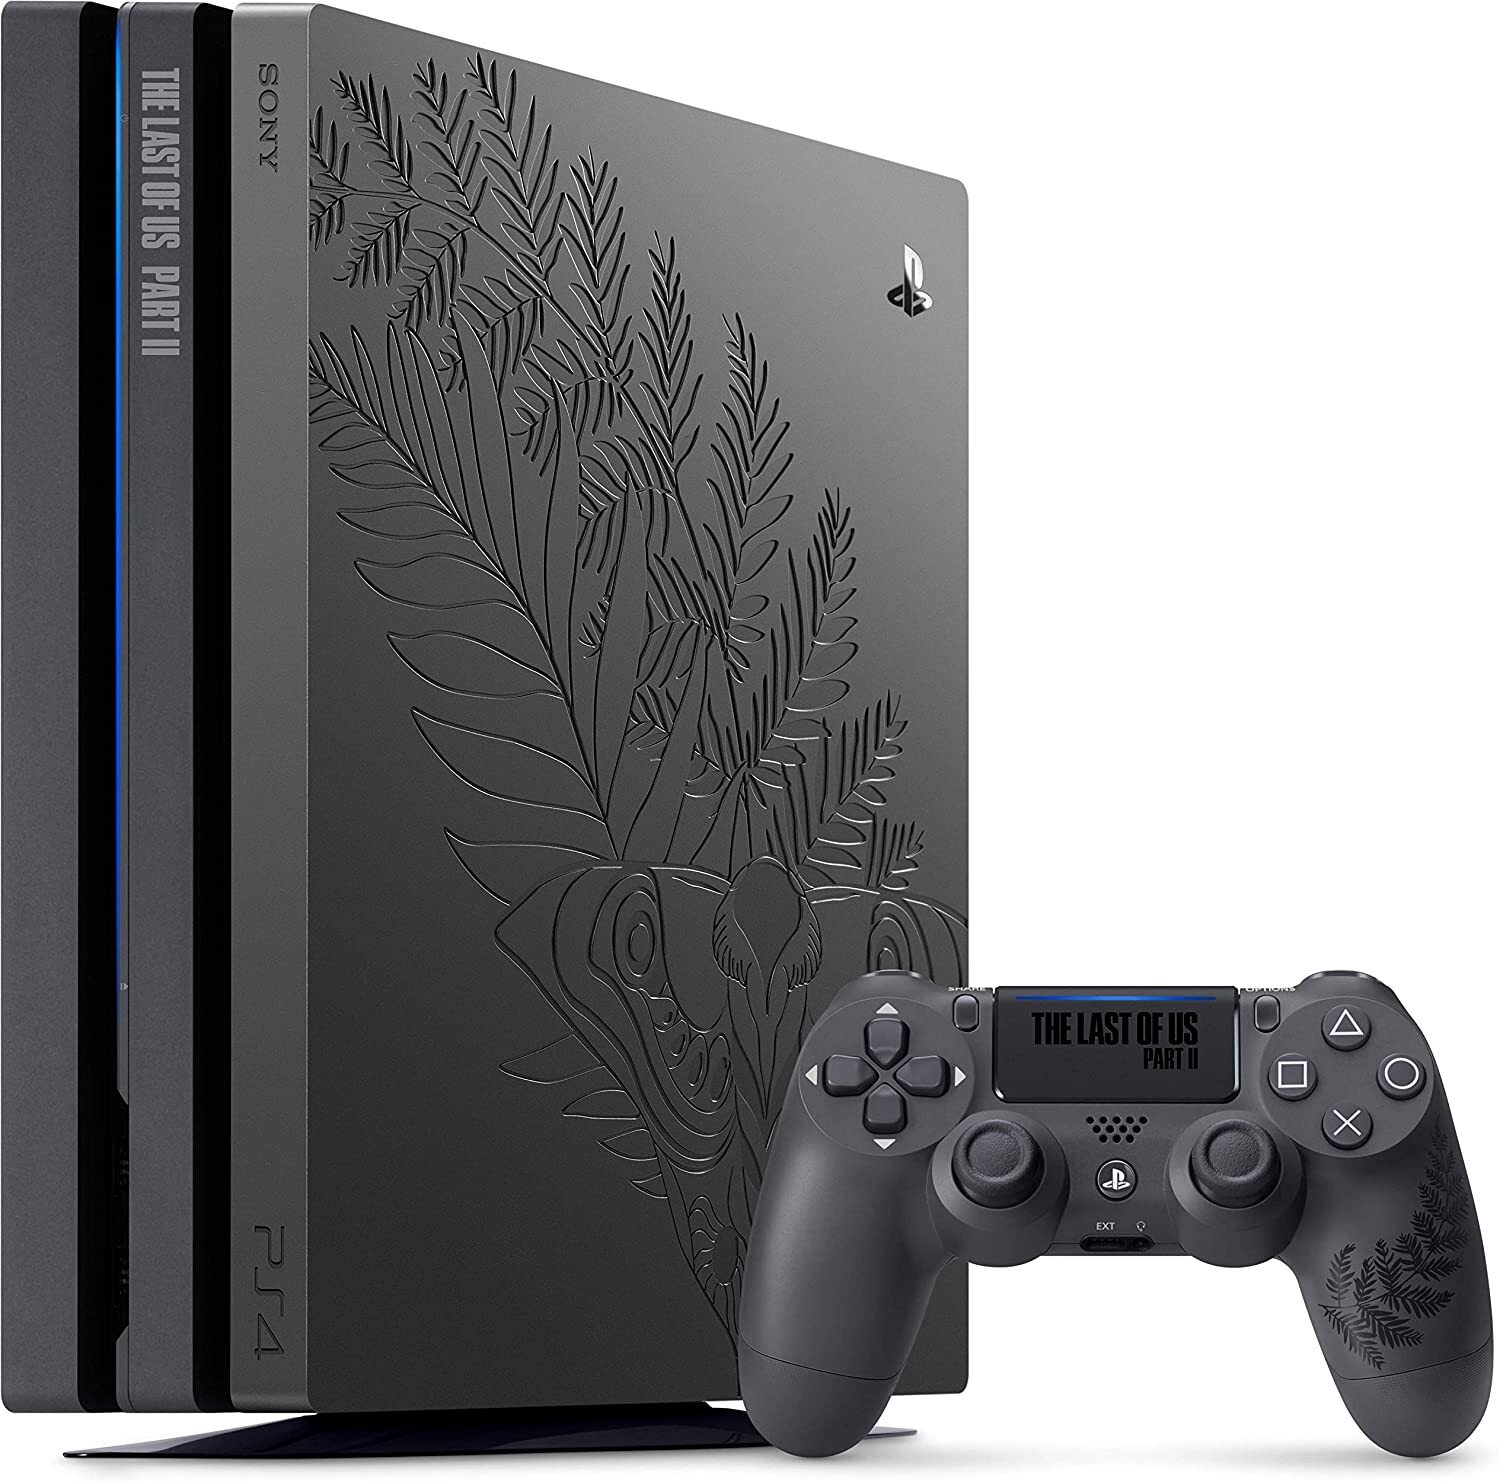 Buy Sony PlayStation 4 Pro Gaming Console 1TB - The Last of Us Part II